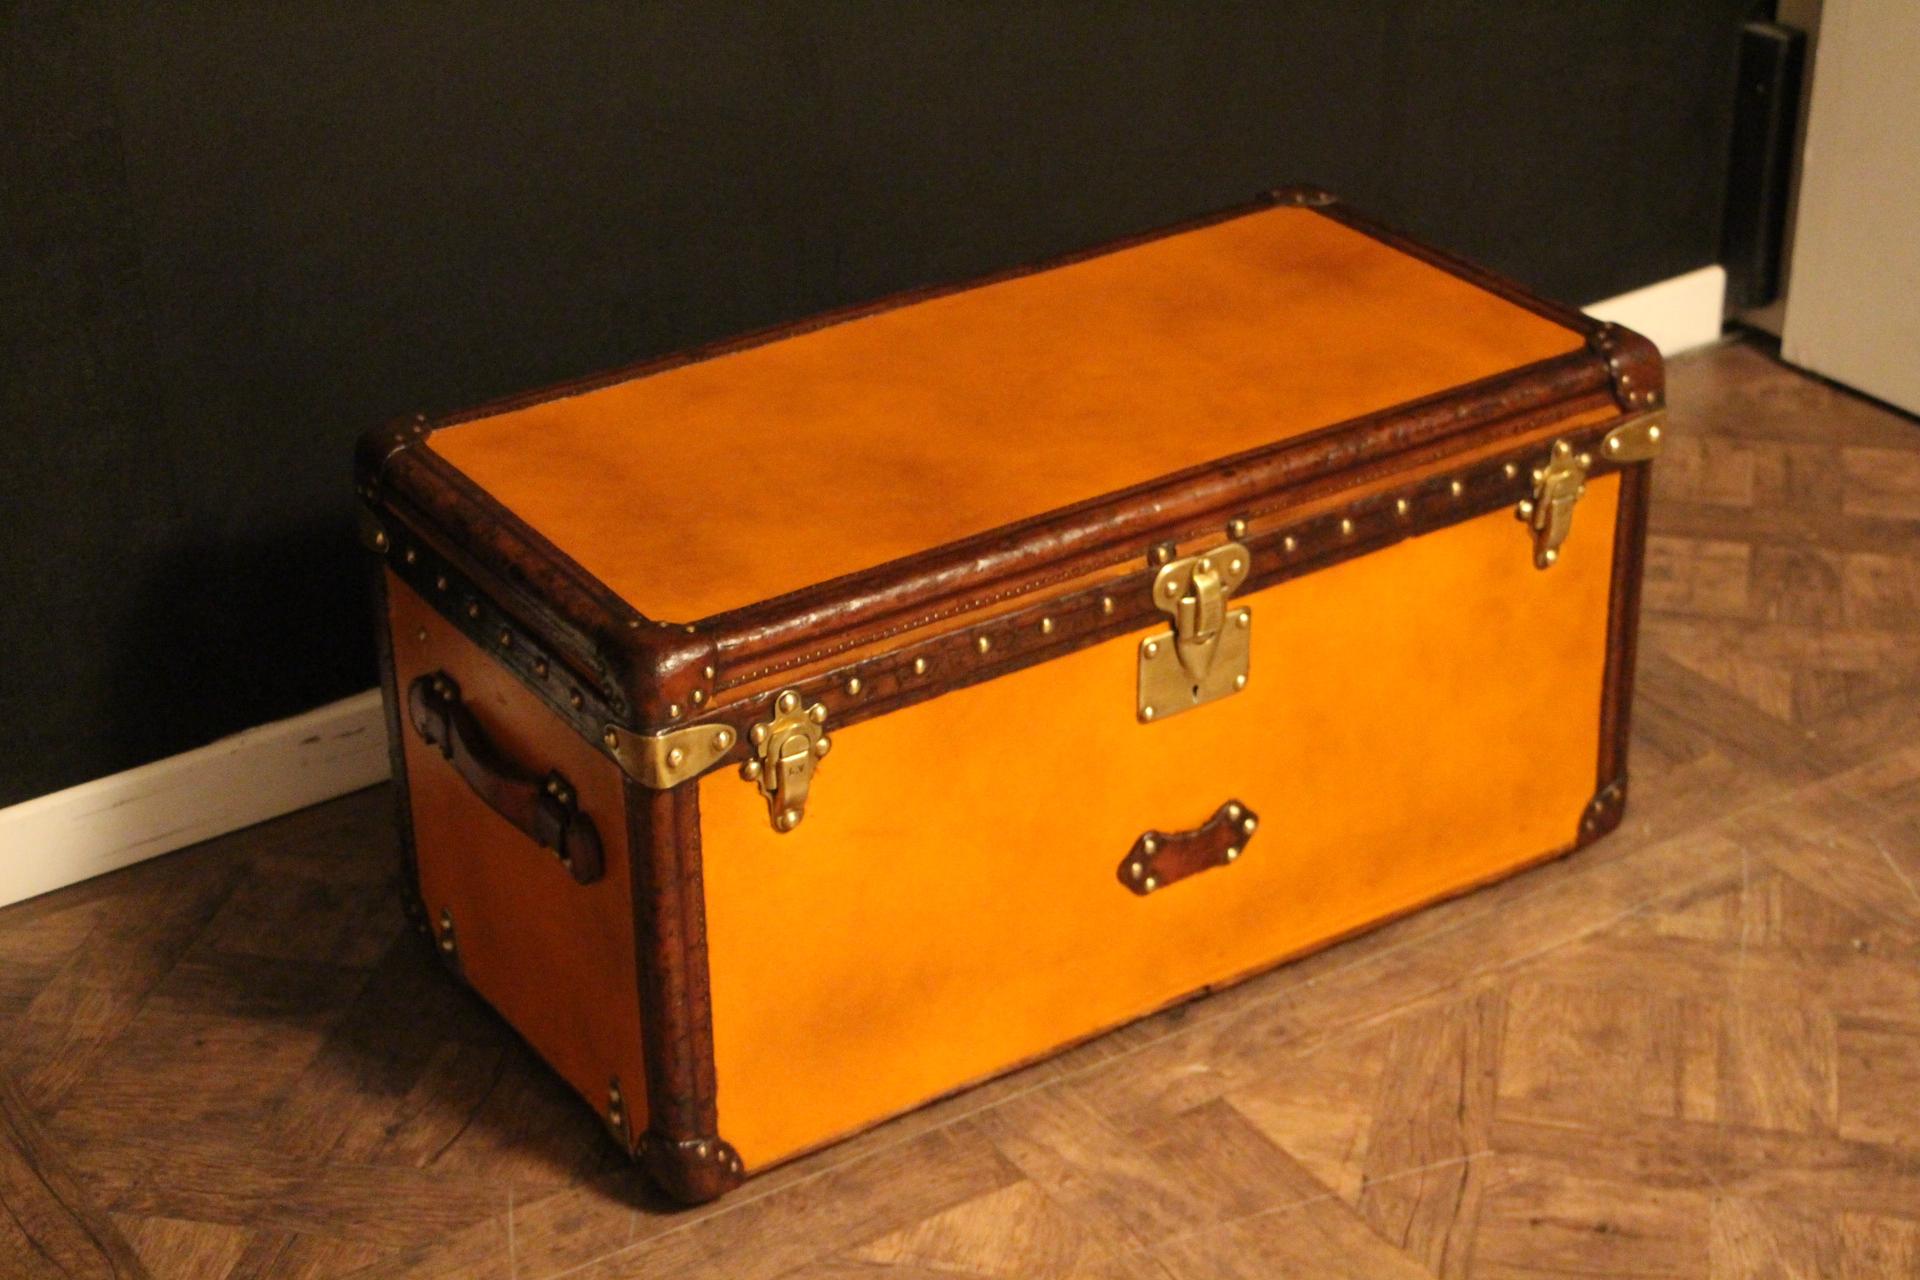 This magnificent Louis Vuitton shoe trunk features the very sought after orange canvas , Louis Vuitton stamped solid brass locks, studs and latches as well as beautiful large side handles in leather. It also has got all chocolate leather trim. It